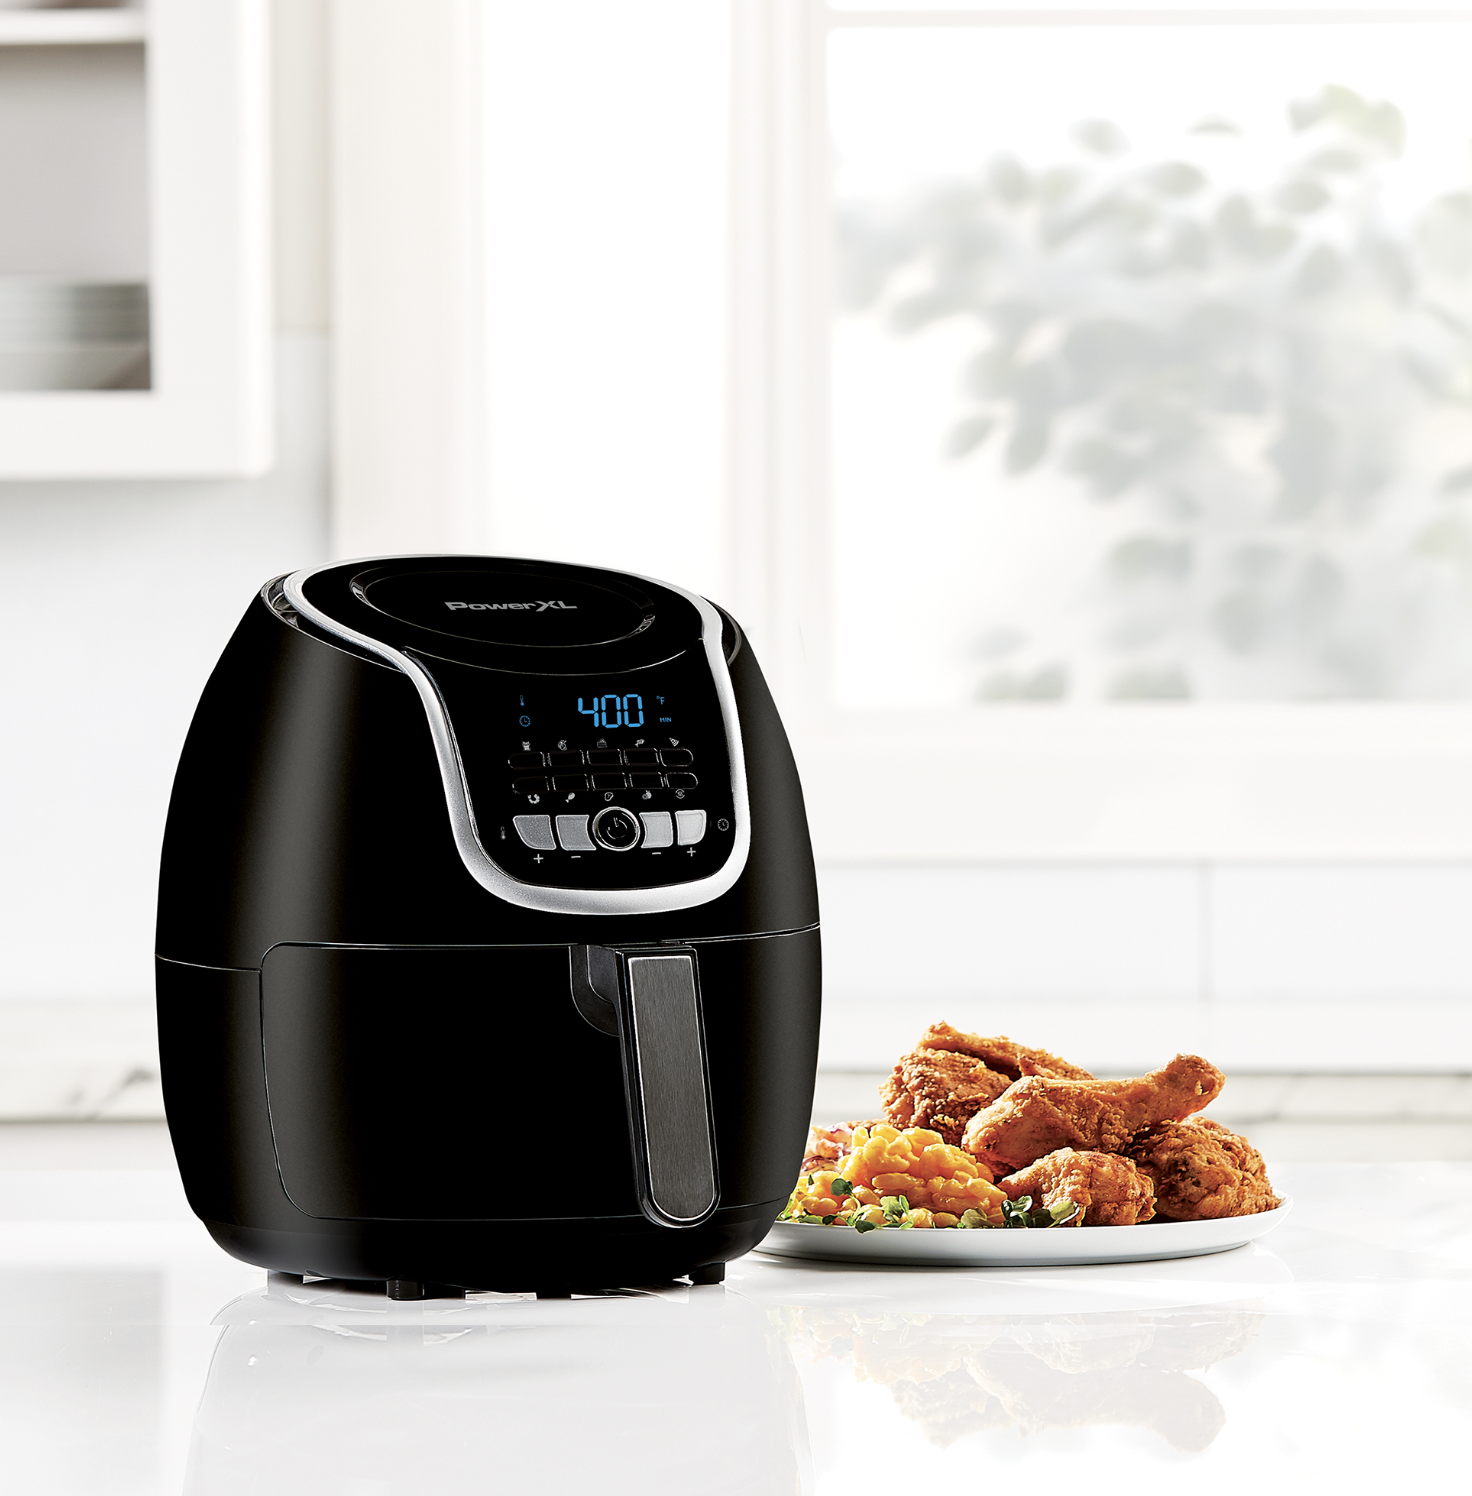 The black air fryer has a silver handle and LED display with various buttons